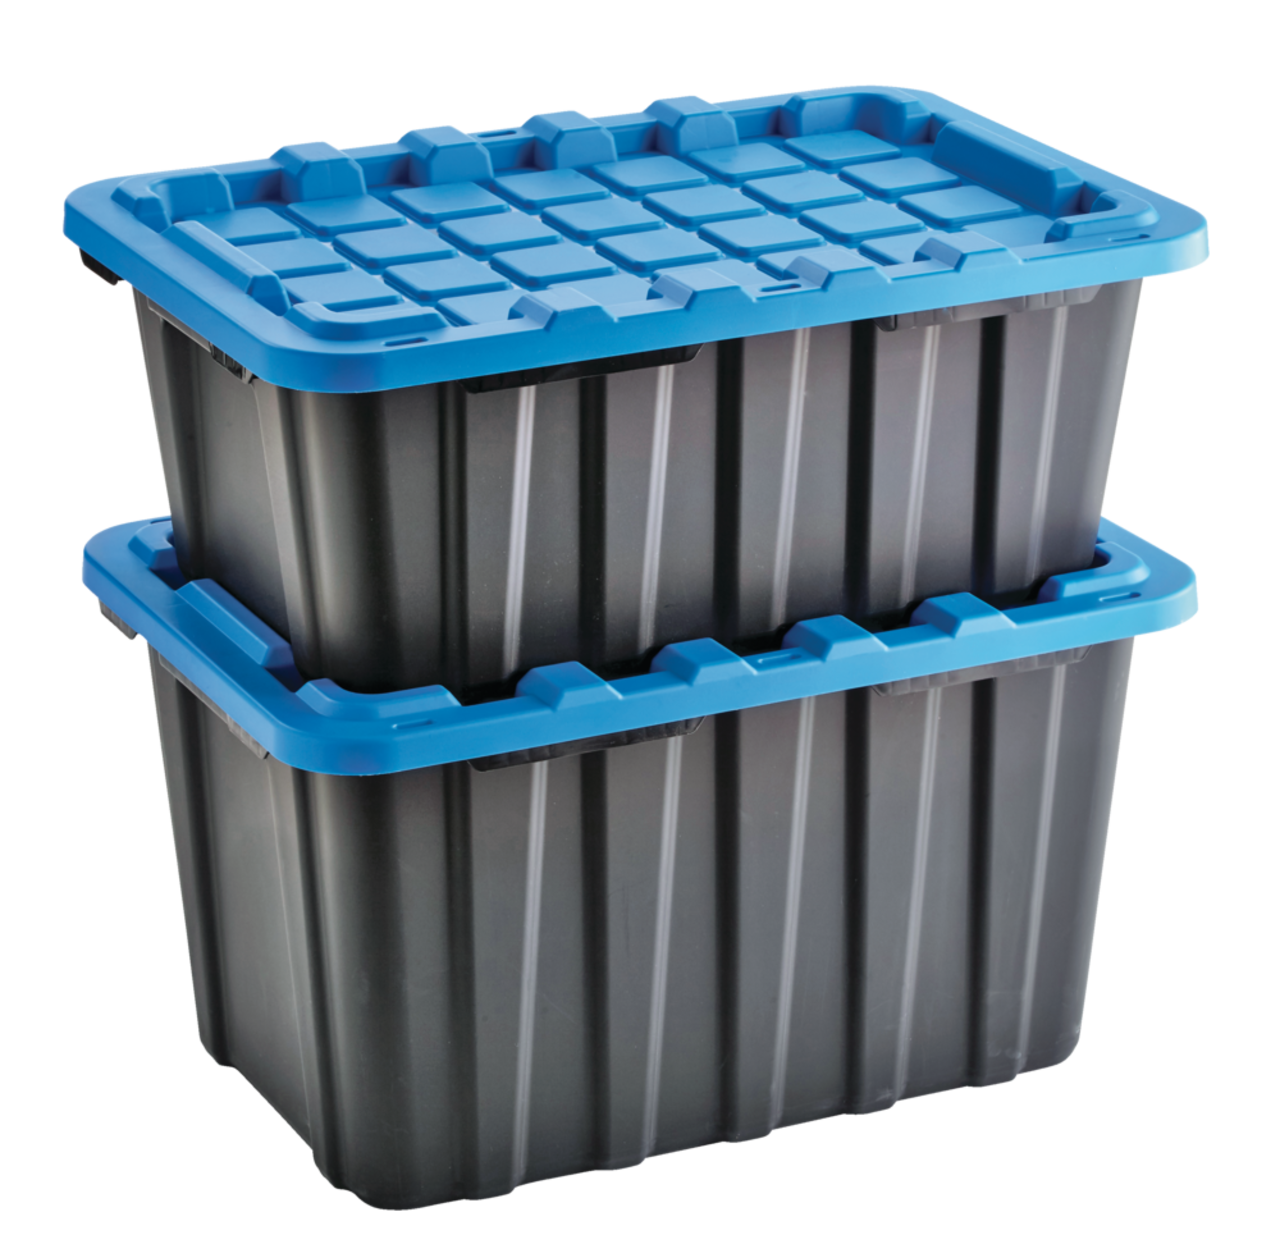 https://media-www.canadiantire.ca/product/living/home-organization/storage-containers/1426045/mastercraft-102l-storage-box-28d9fae6-be99-40e0-9136-d722ab82cb9d.png?imdensity=1&imwidth=1244&impolicy=mZoom